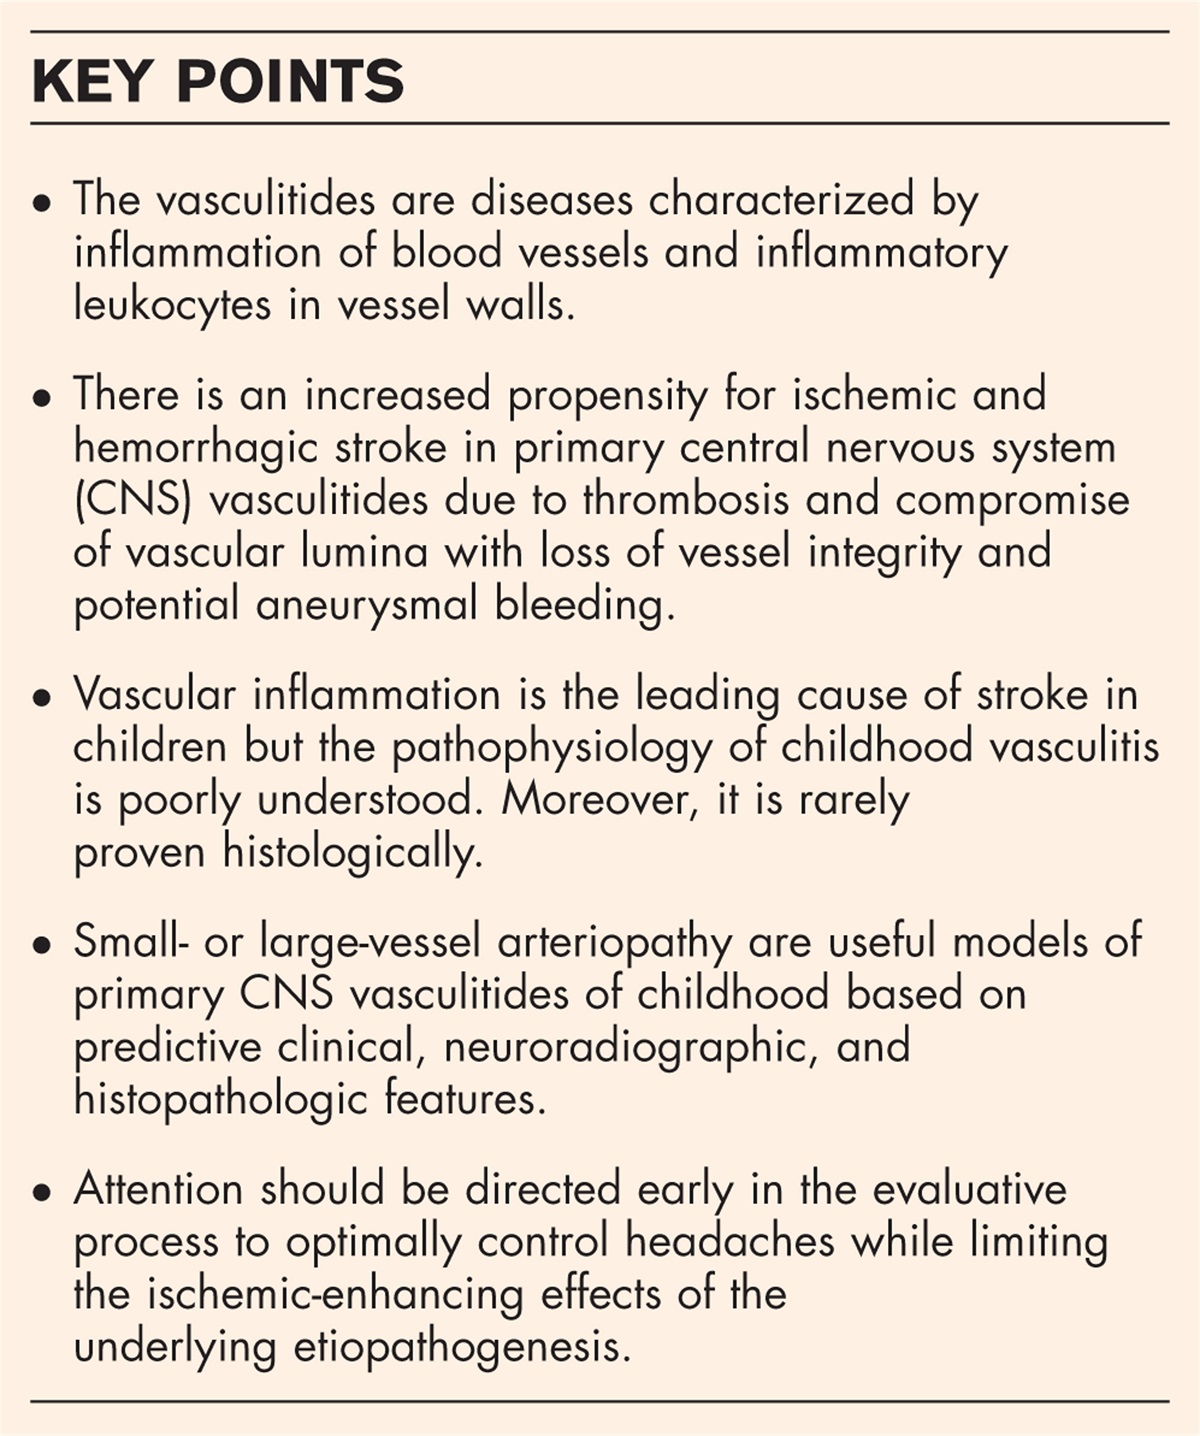 Primary central nervous system vasculitis and headache: Ten themes